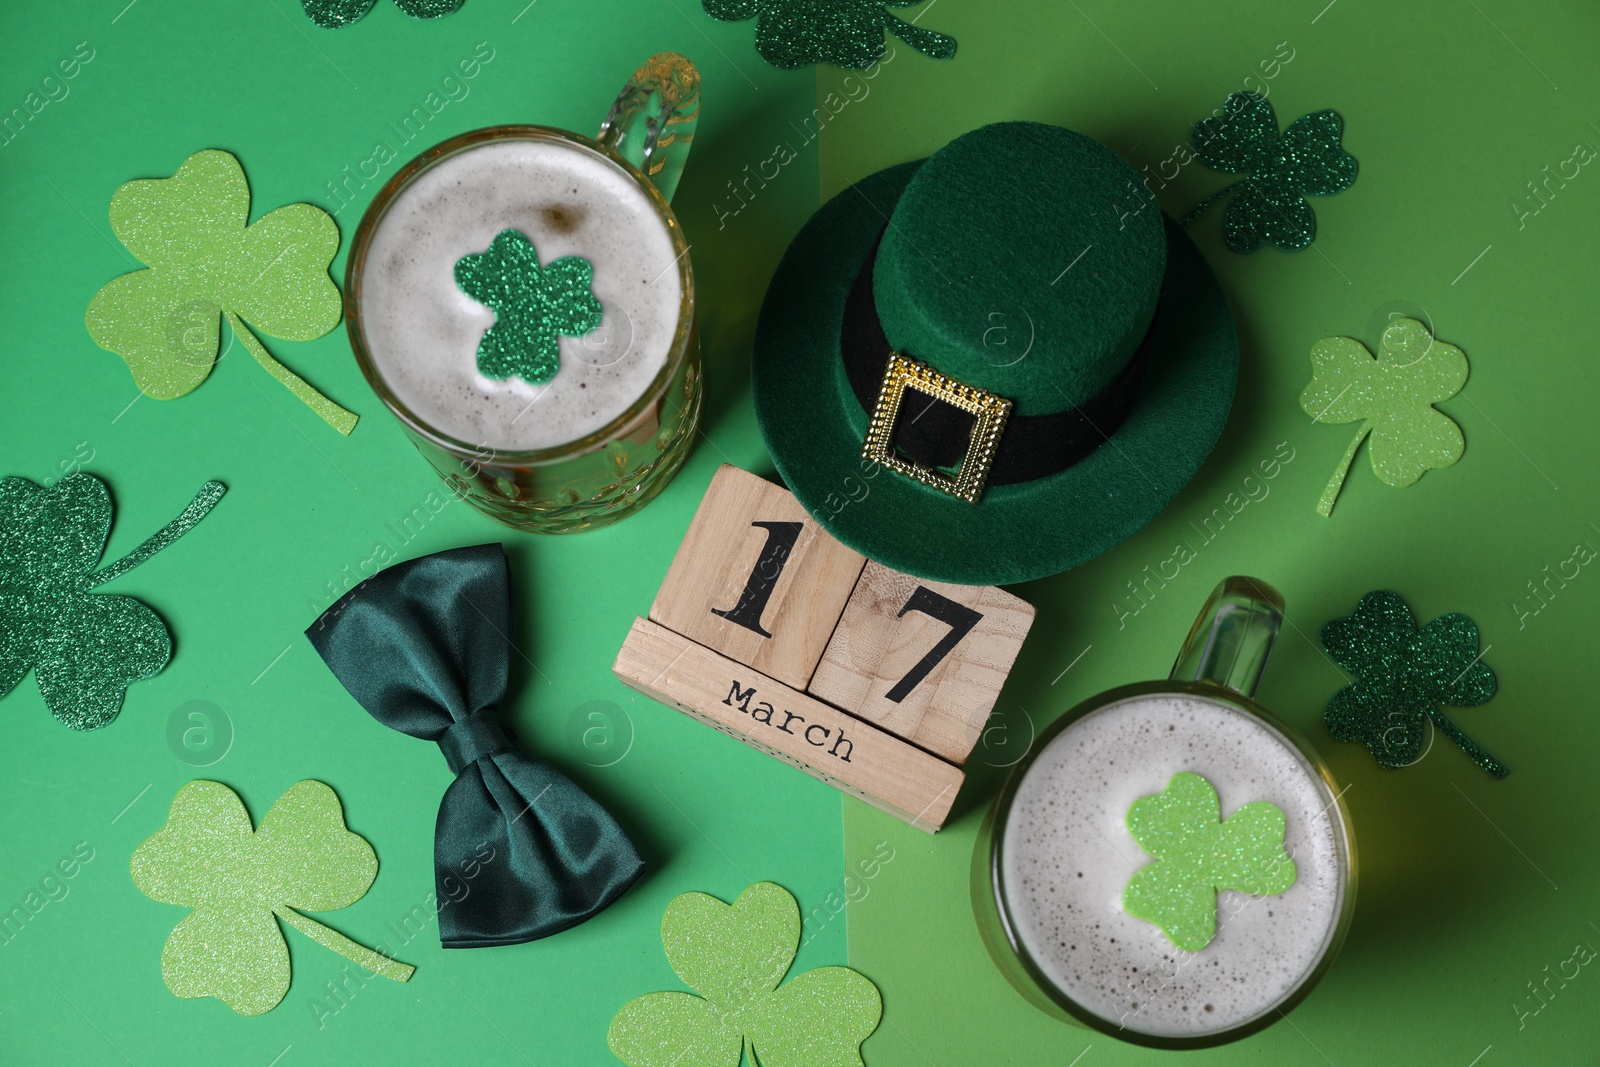 Photo of St. Patrick's day party on March 17. Green beer, leprechaun hat, bowtie, wooden block calendar and decorative clover leaves on green background, flat lay